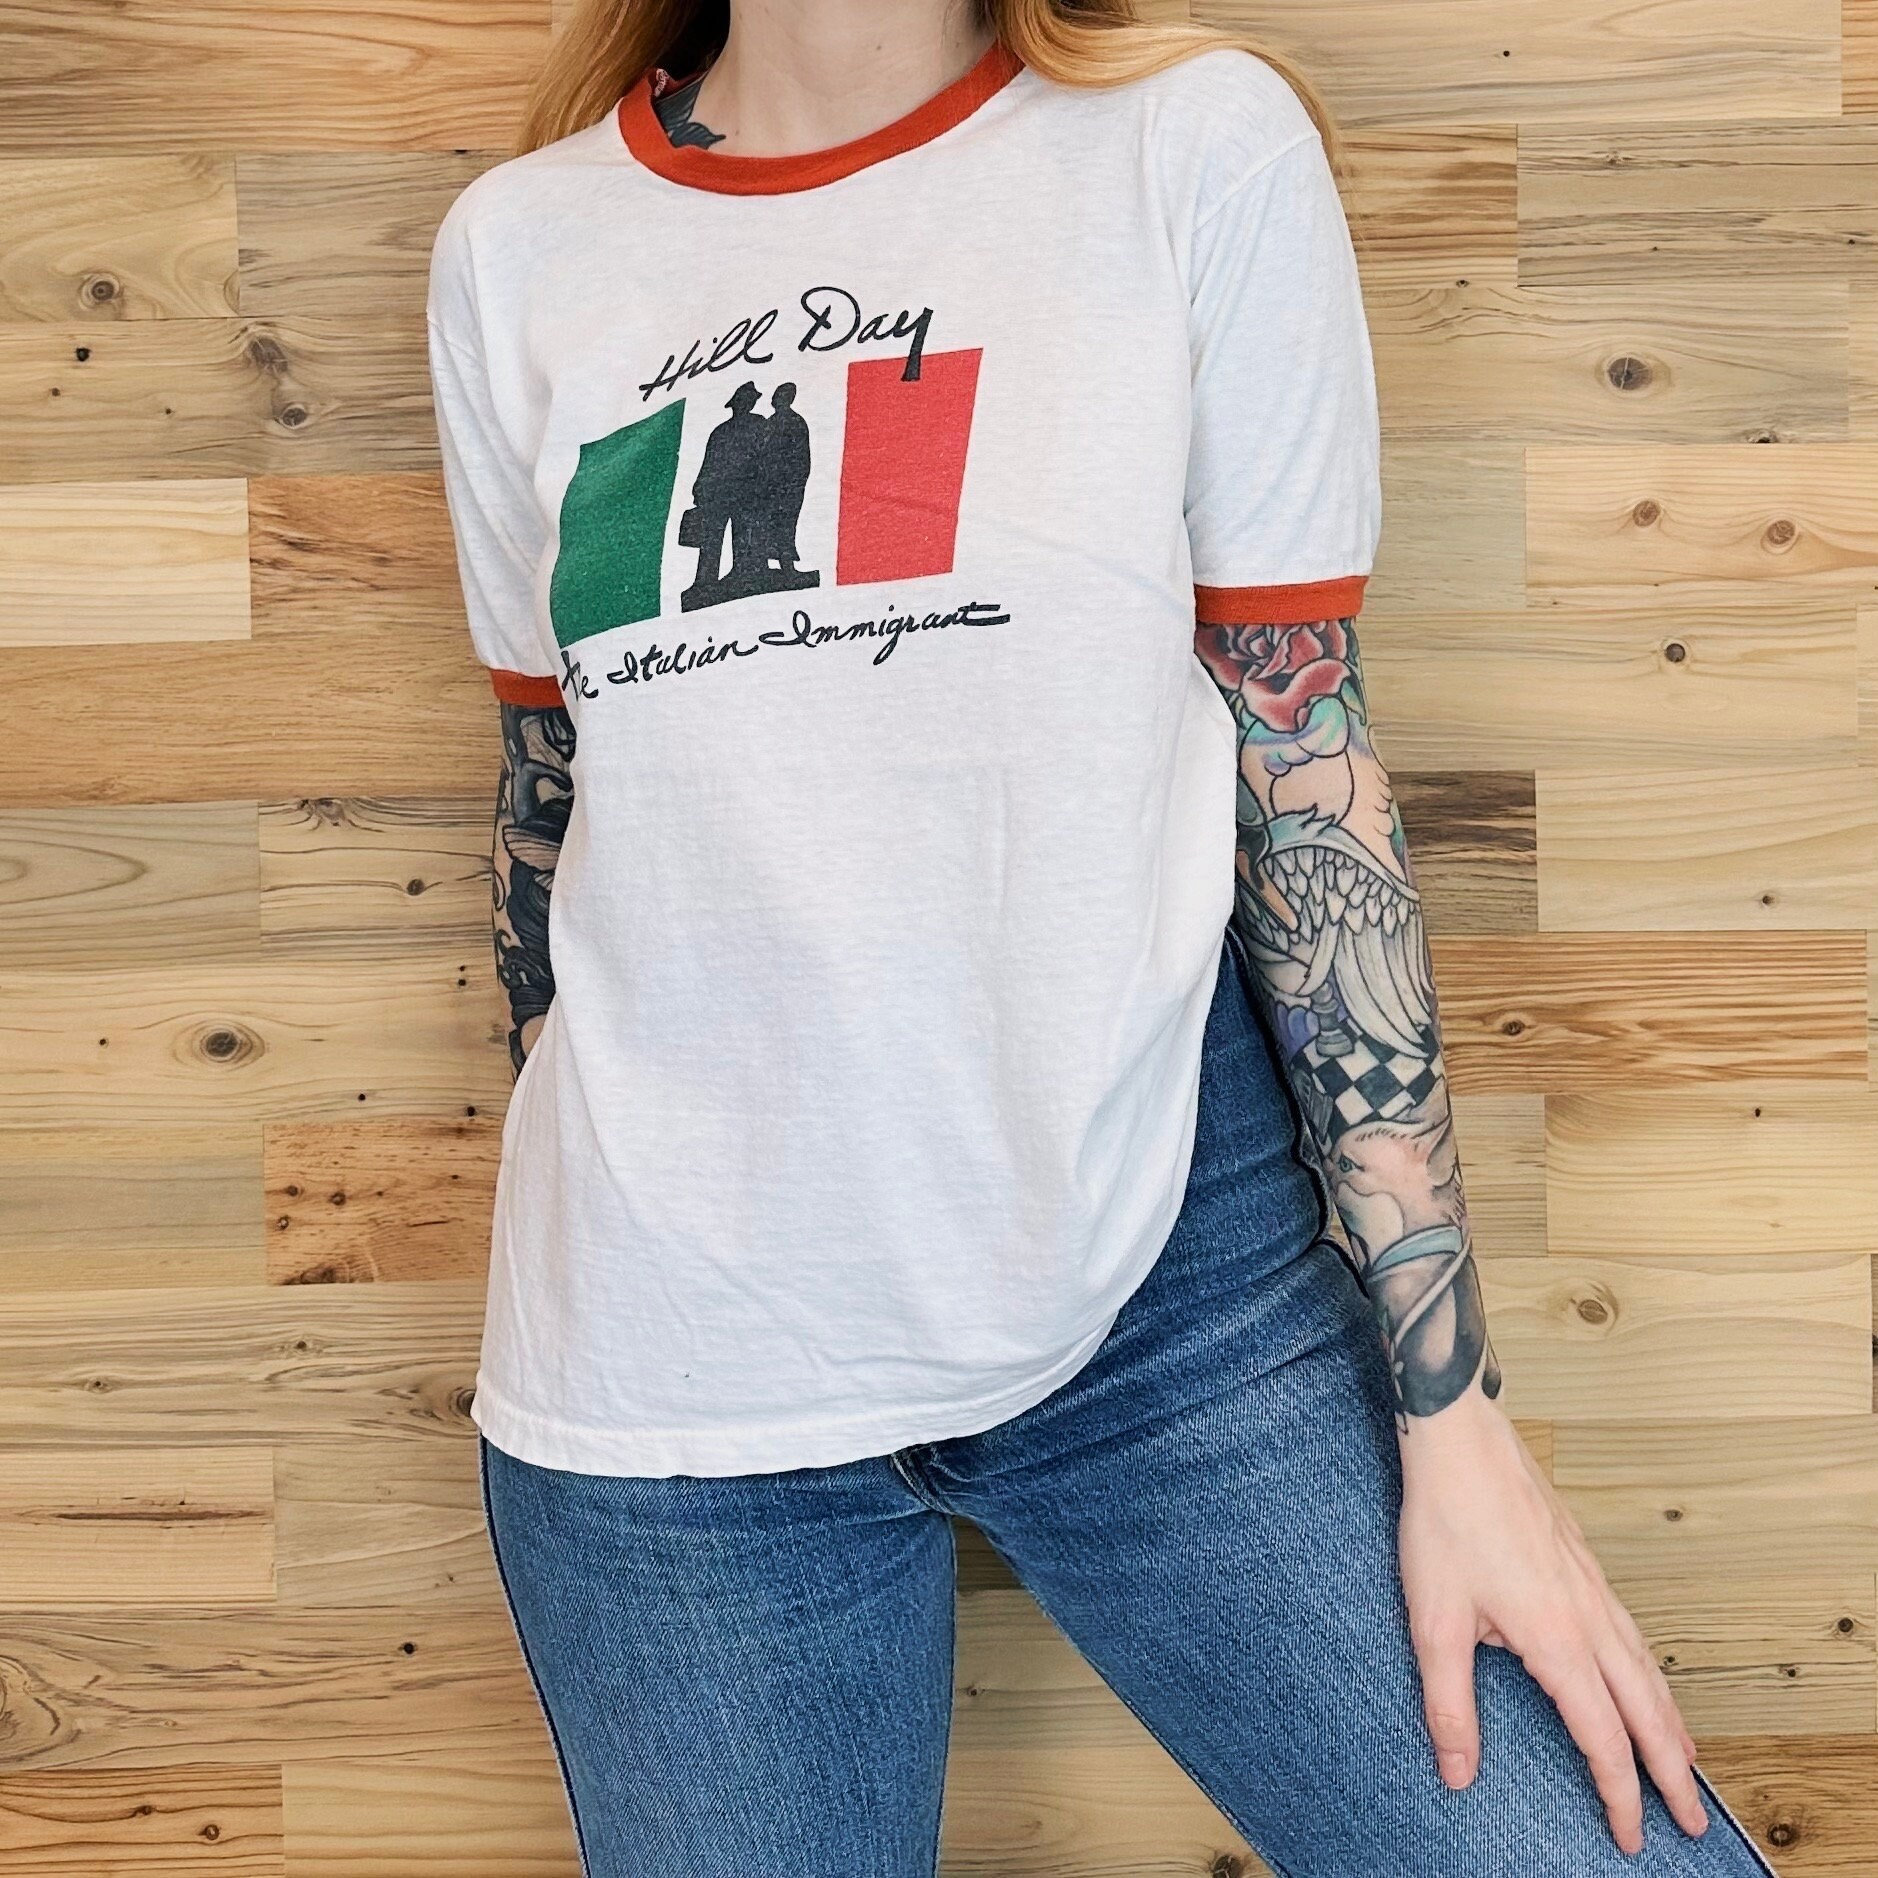 70's Vintage Hill Day the Italian Immigrant Ringer Tee 